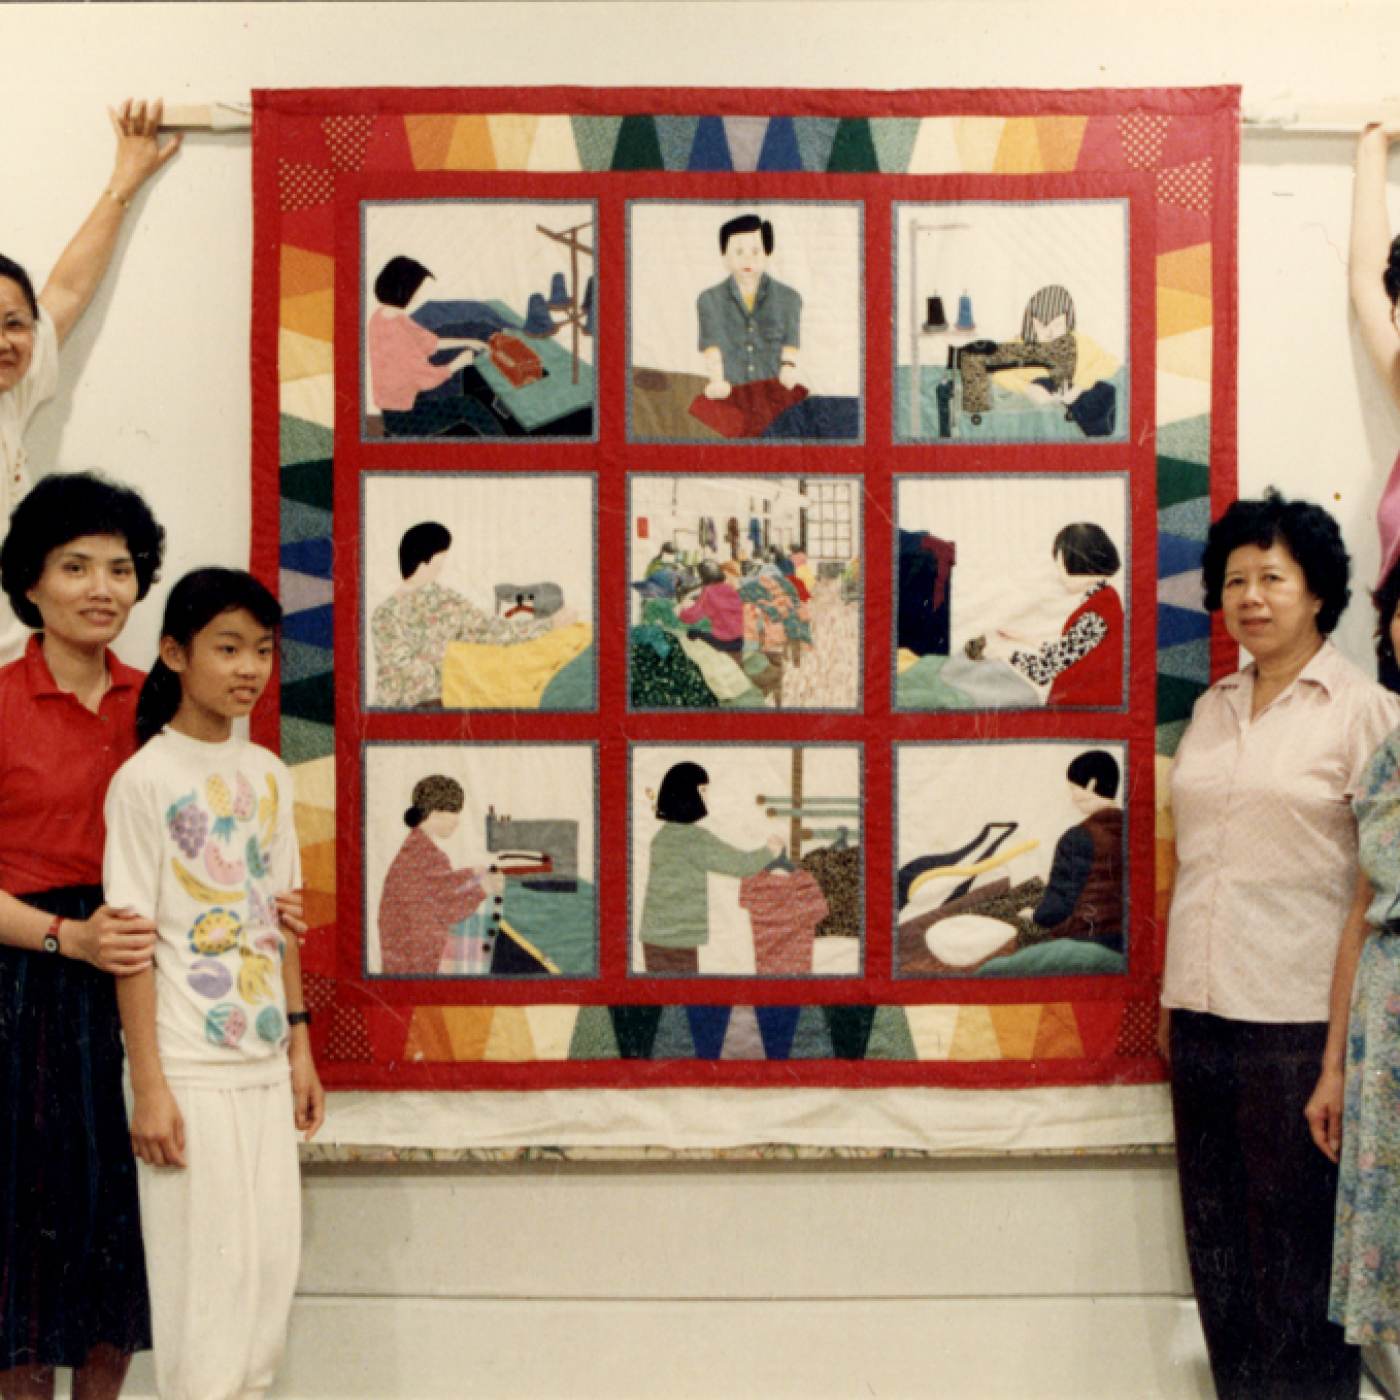 Quilt maker Debbie S. Lee (top right) collaboratively created the Garment Workers Quilt with Yan Chai Mak, Cecilia Lo, Ng Mui Leung, Sheung Ngor Leung, So Fong Lee Ng, Sun Ng, and Heng Yu Yan, all garment workers in New York Chinatown. Here they are posed on either side of a display of their quilt at MOCA’s 1989 exhibit, “Both Sides of the Cloth.” Museum of Chinese in America (MOCA) Collection.